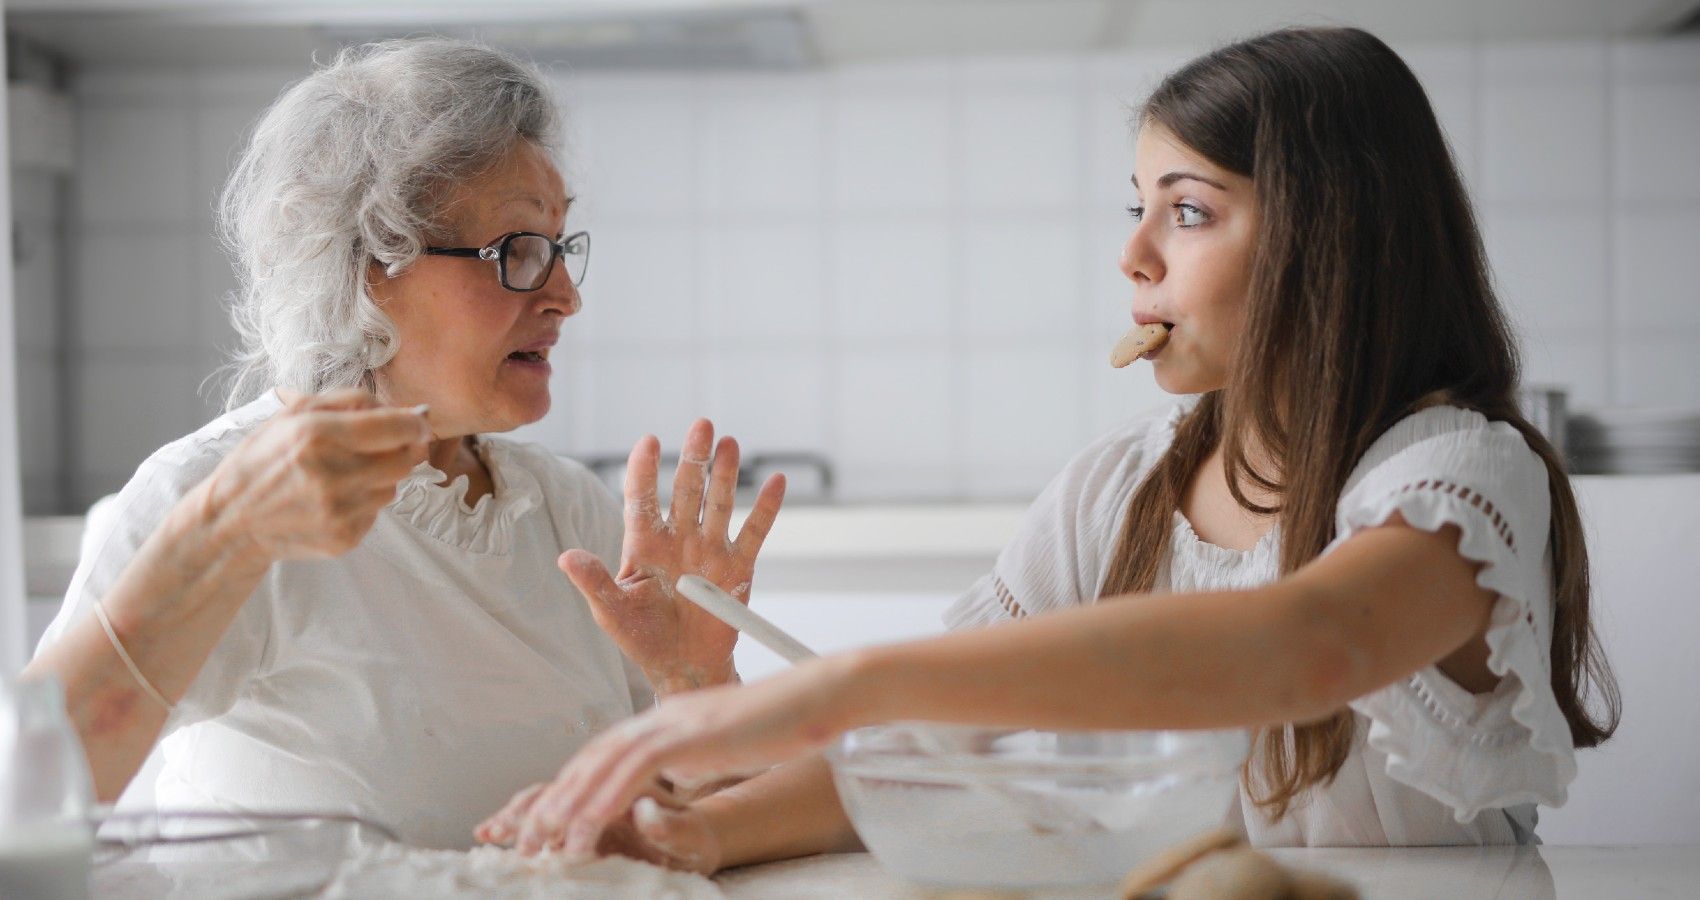 A granddaughter talking to her grandmother in the kitchen